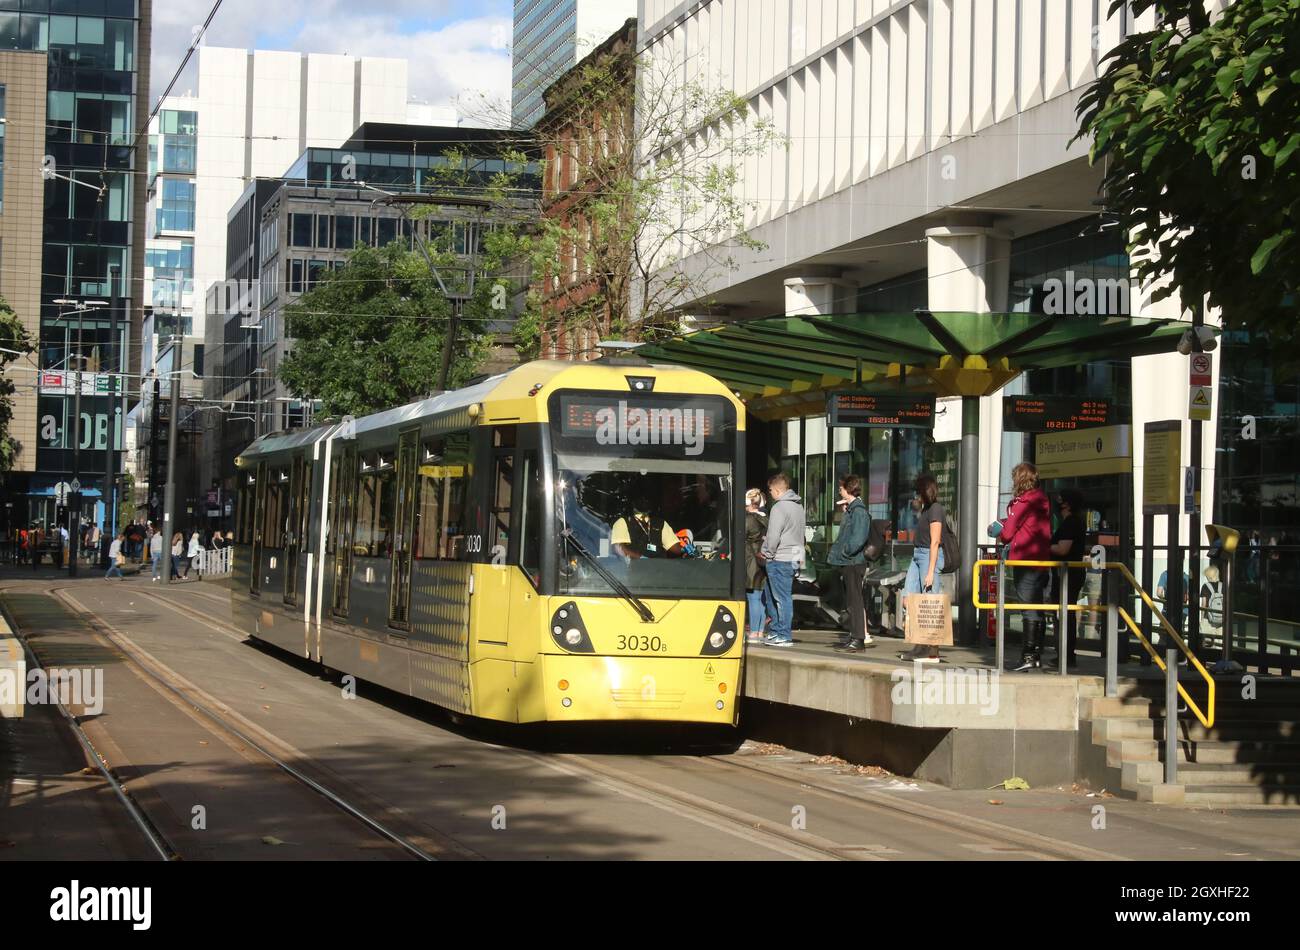 Manchester Metrolink Bombardier M5000 tram, number 3030, at the tram stop in St Peter's Square with a service to East Didsbury on 22nd September 2021. Stock Photo